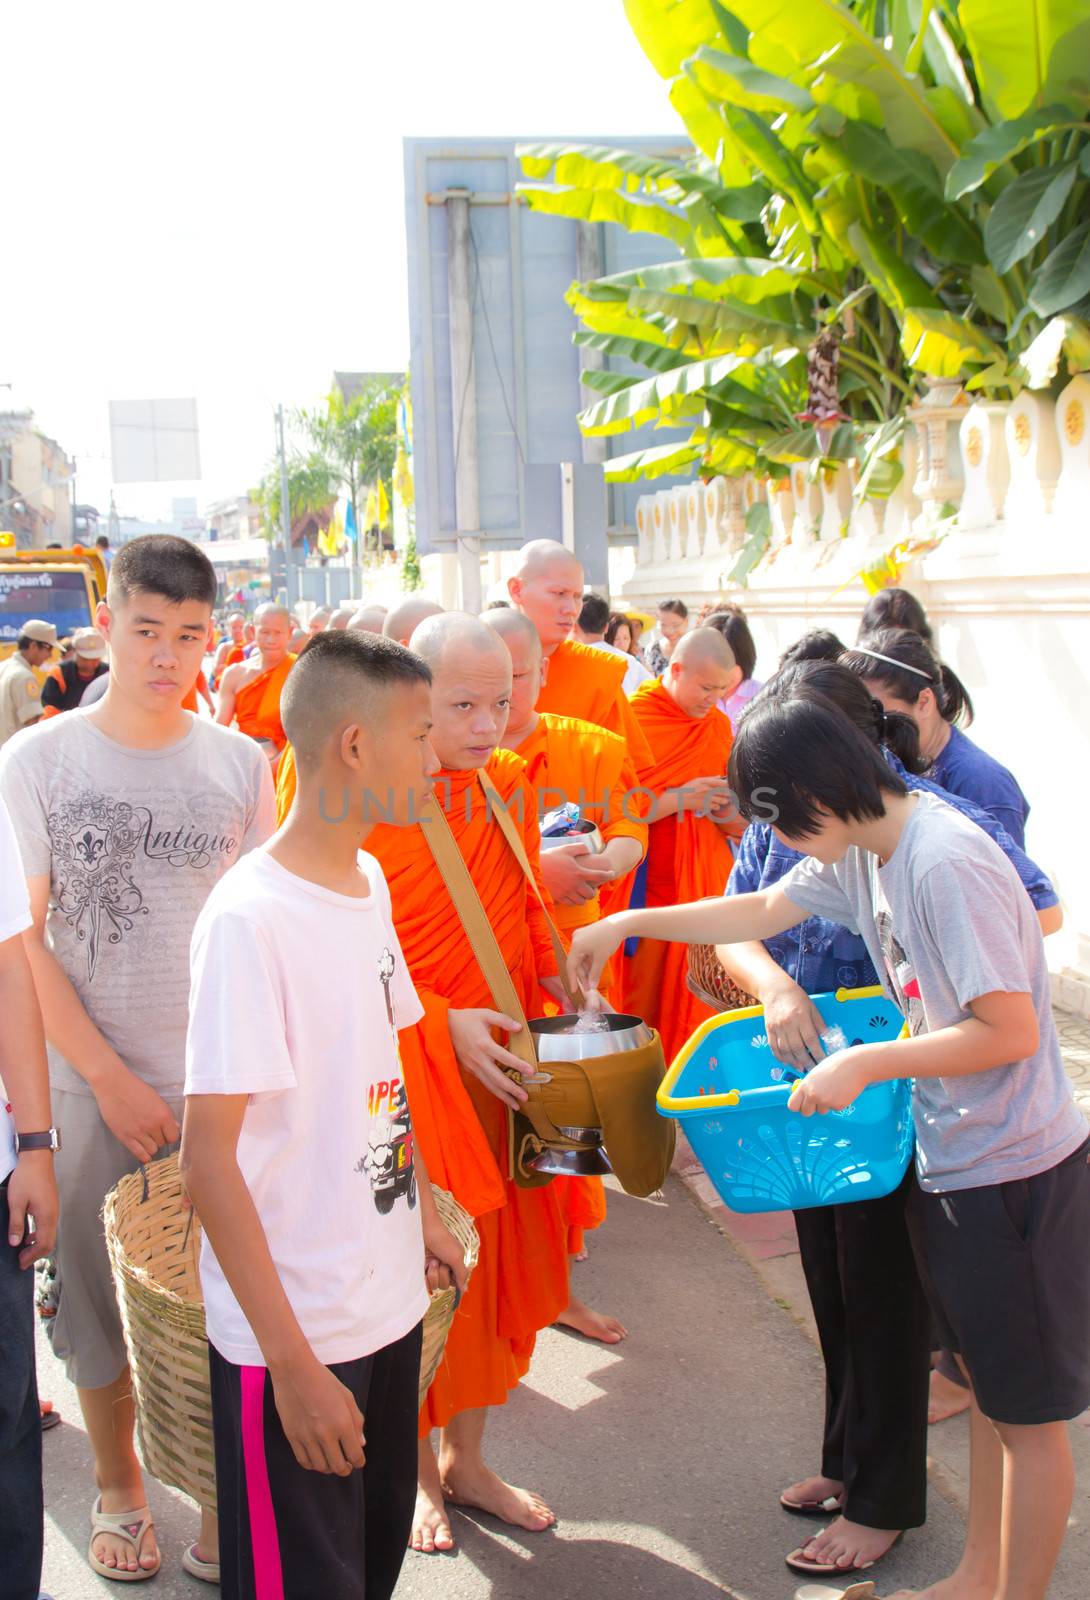 Phrae,Thailand - October 31,2012 : Unidentified Buddhist monks is given food offering from people at the morning on End of Buddhist Lent Day. on october 31, 2011 in Muang, Phrae, Thailand.